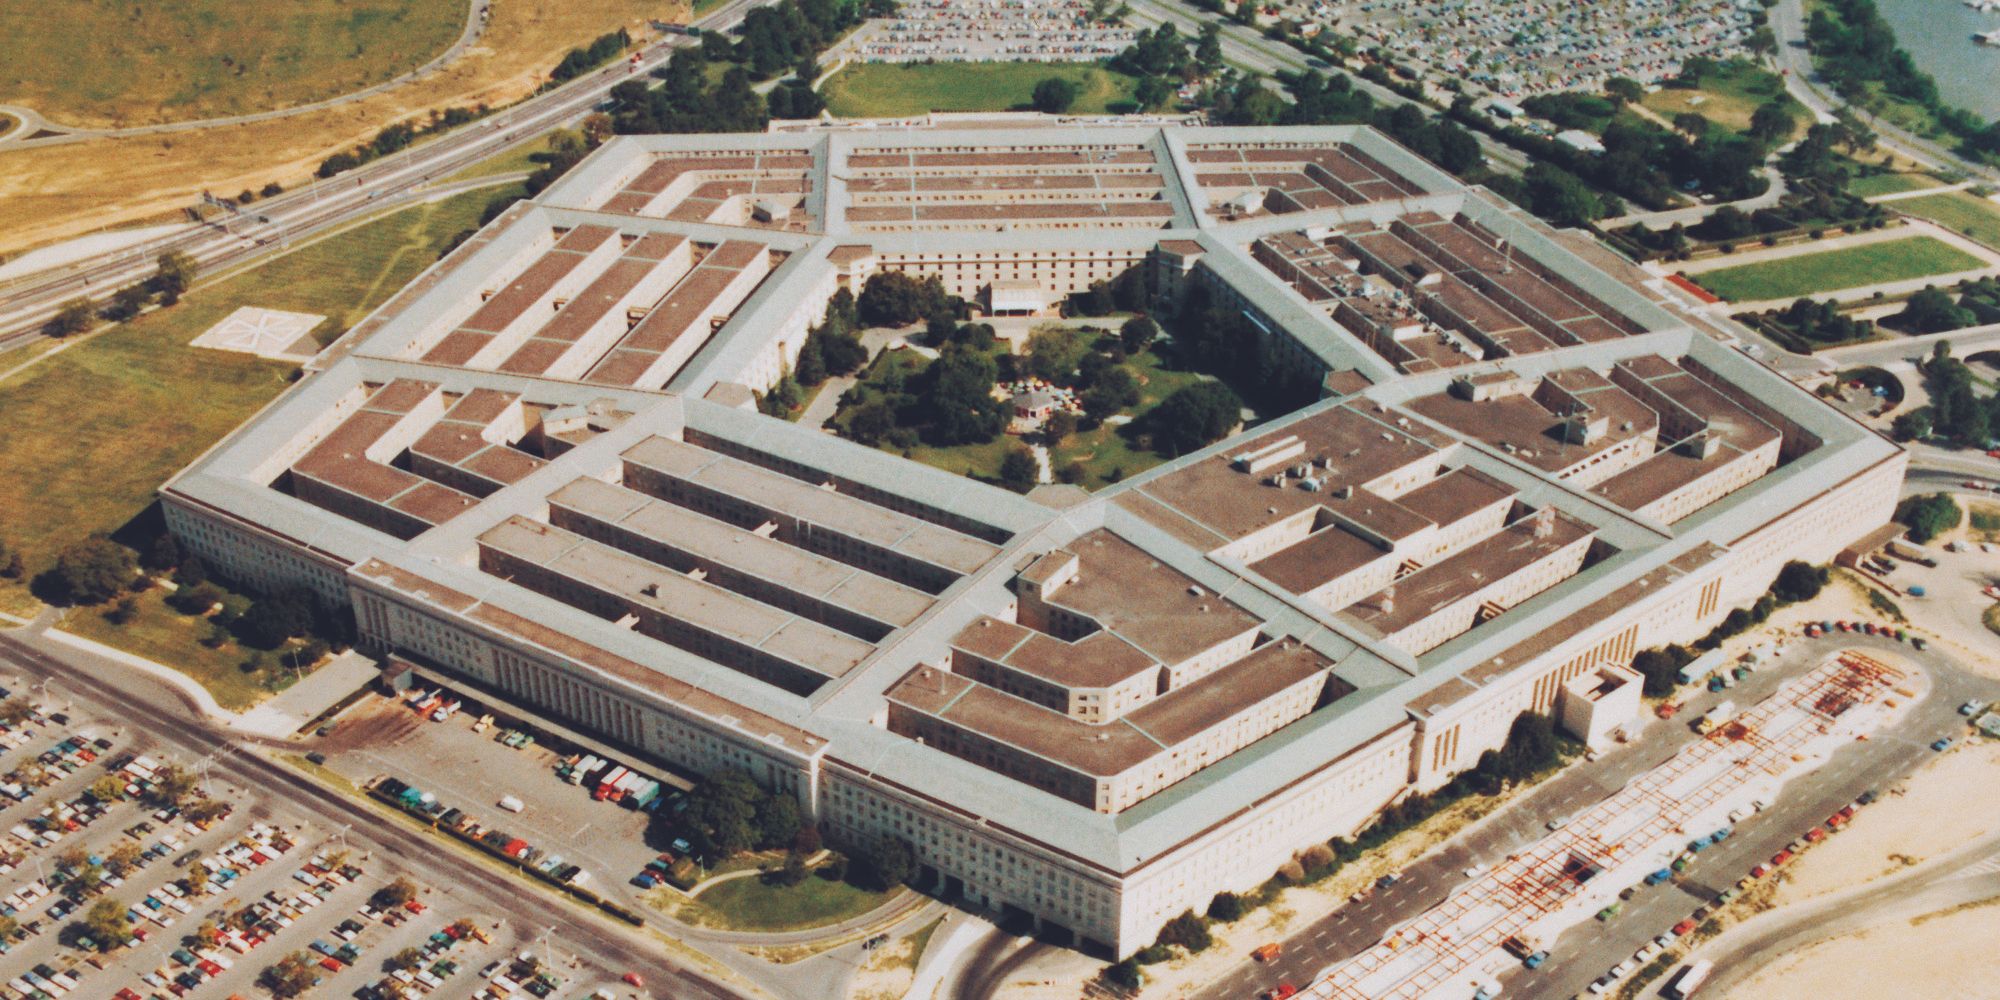 Pentagon Passes Audit For First Time Ever, Clearly Explains All Their Spending